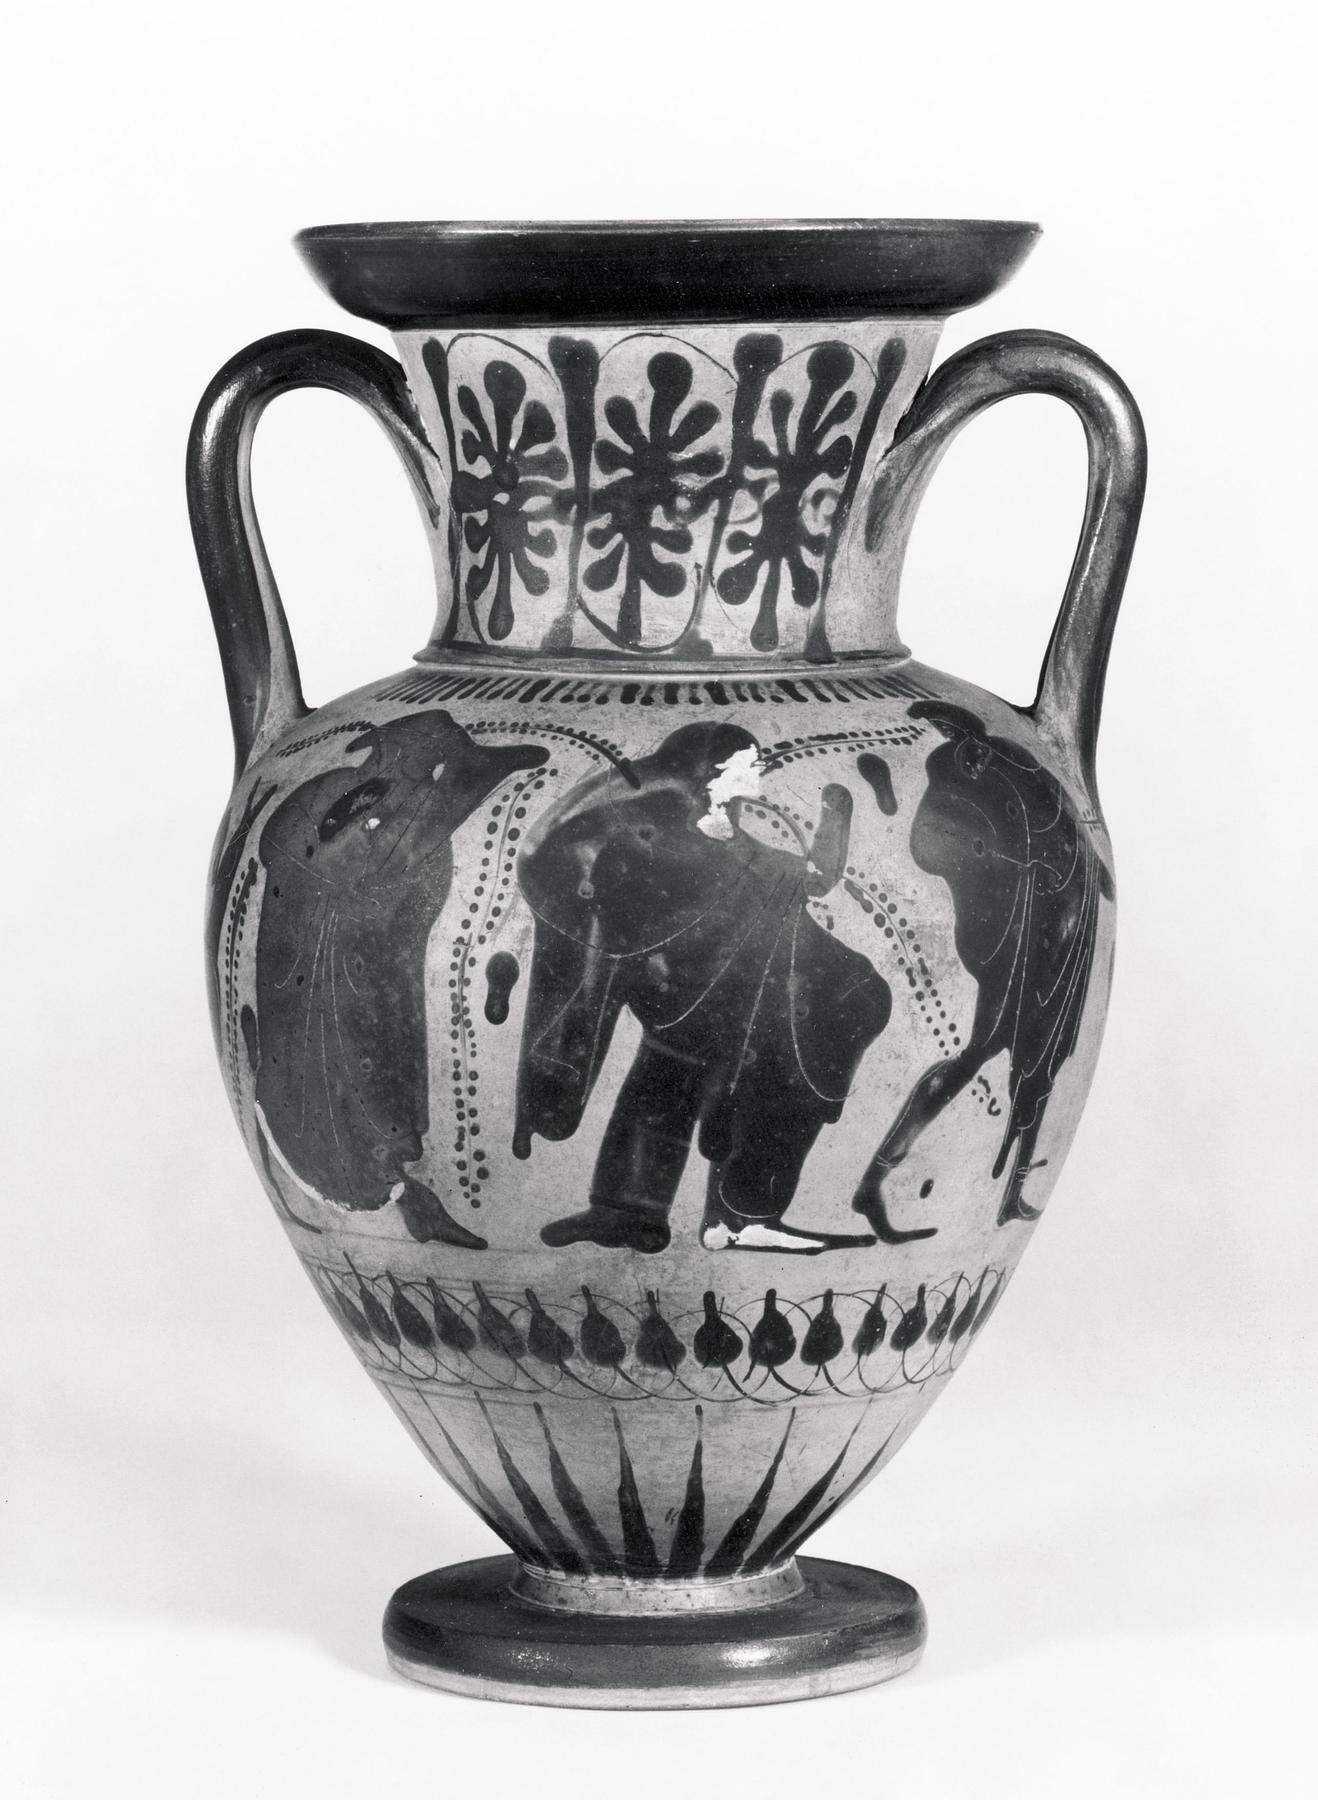 Amphora with Ariadne, Theseus, and Dionysos (A) and Ajax and Achilles (B), H512